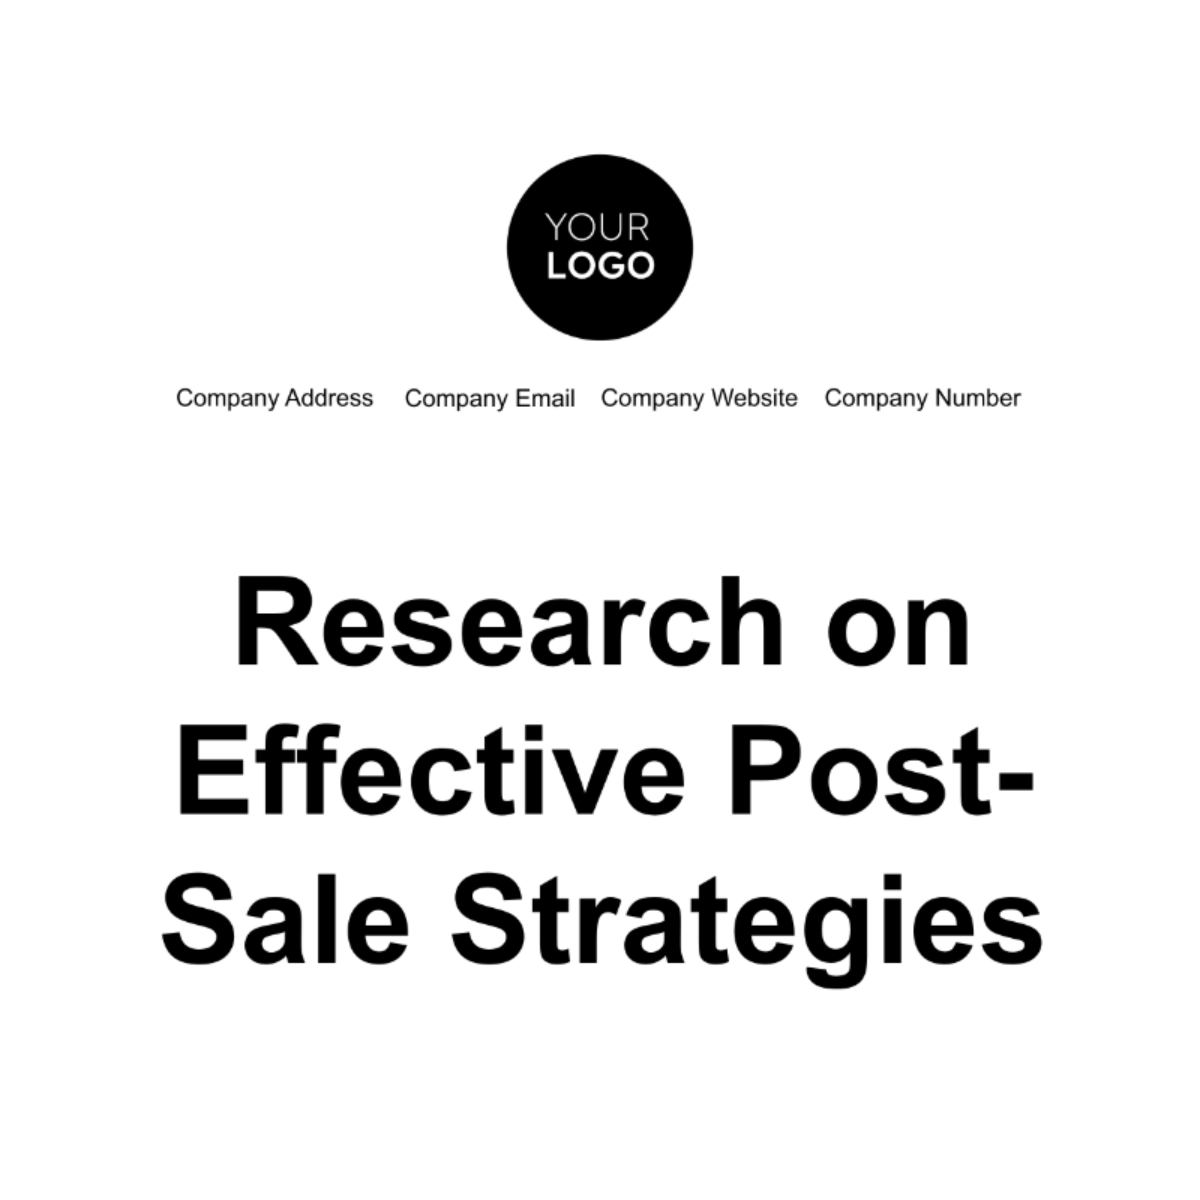 Free Research on Effective Post-Sale Strategies Template